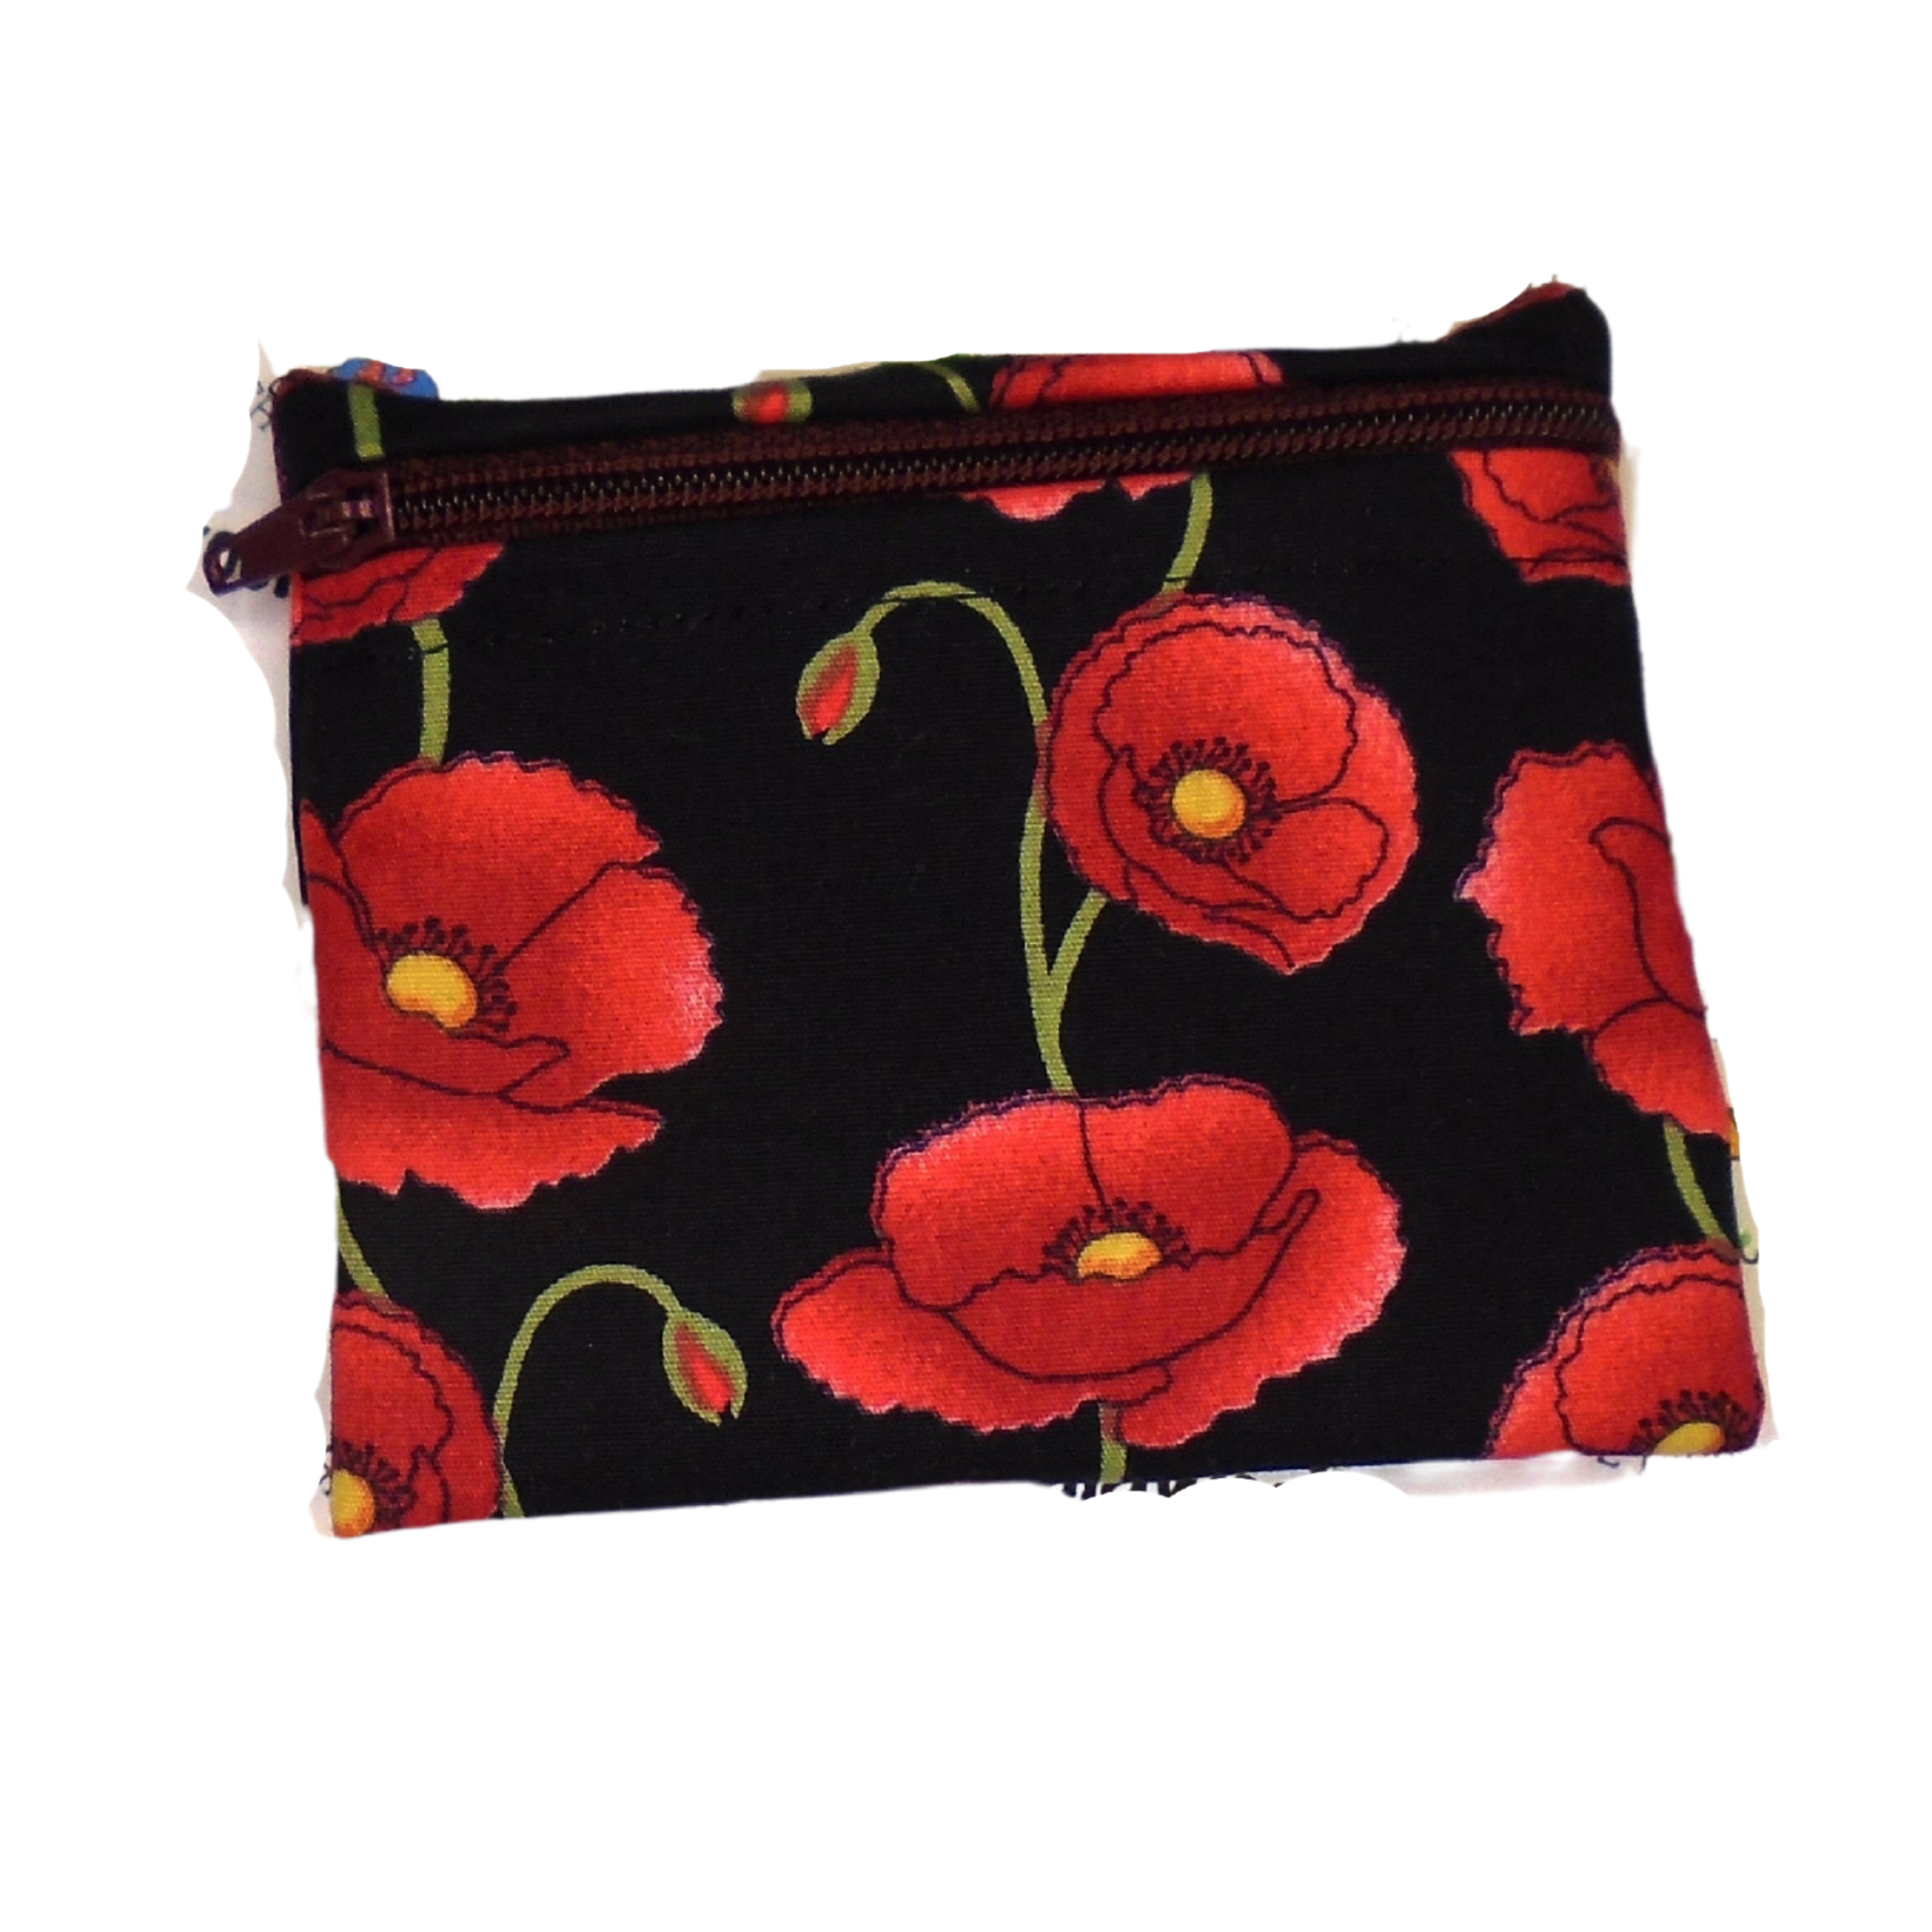 Poppy Stems - Snack Bag - Small Pippins Waterproof Pouch for Food, Makeup and more, Eco-Friendly and Washable Lunch, Travel, and Storage